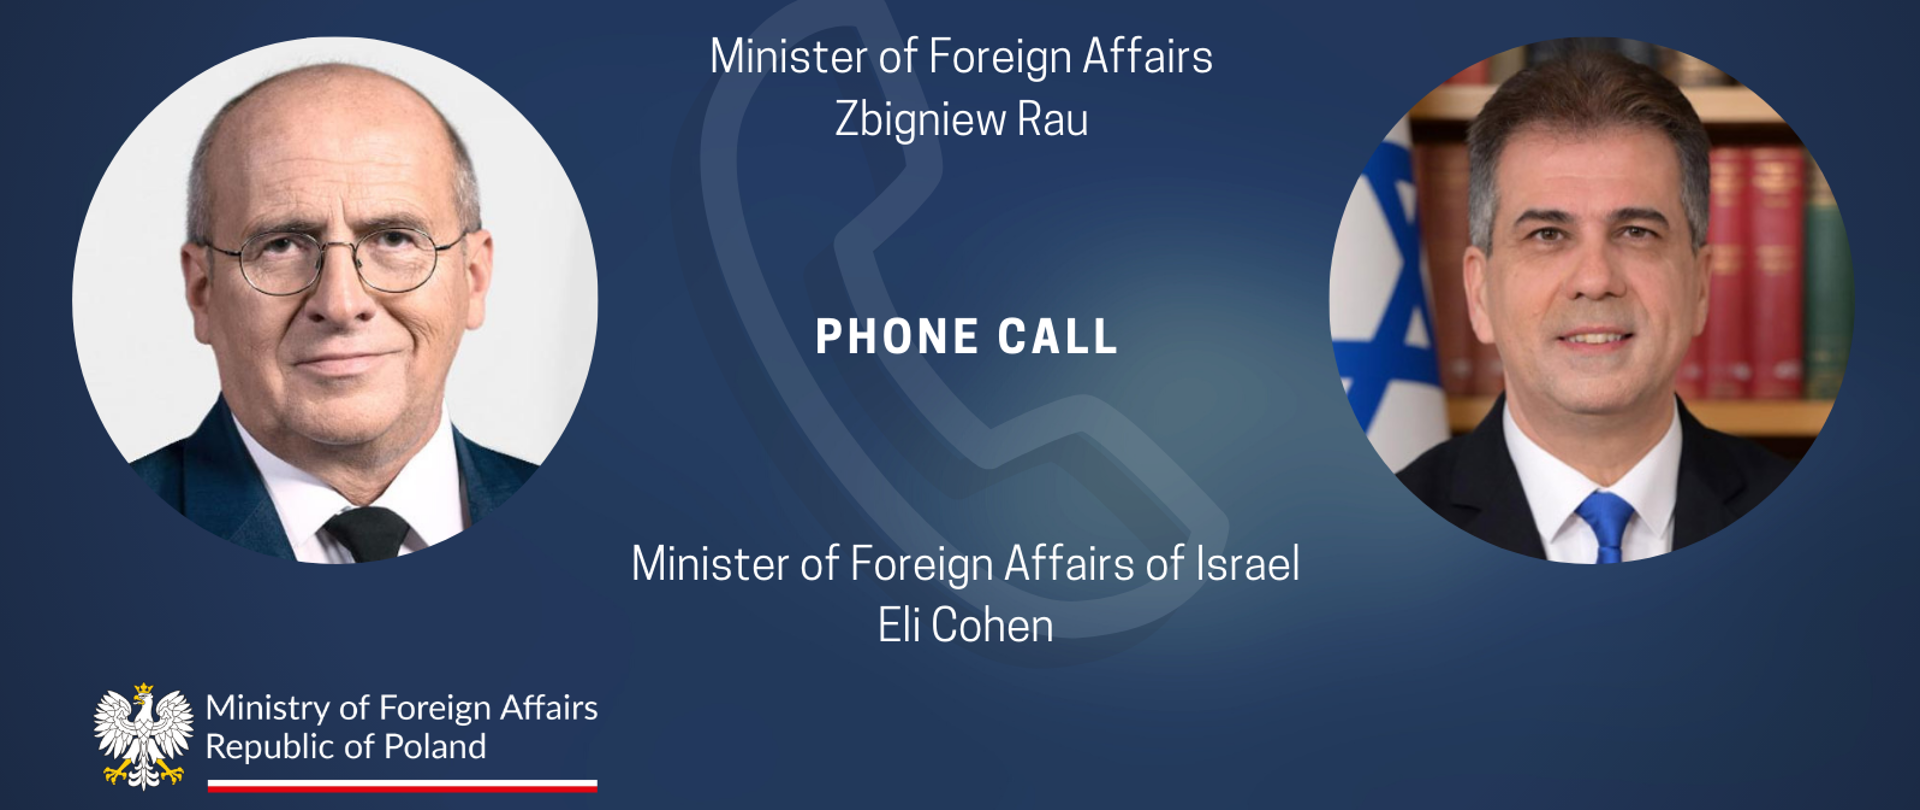 Minister of Foreign Affairs Zbigniew Rau held a telephone conversation with his Israeli counterpart Eli Cohen